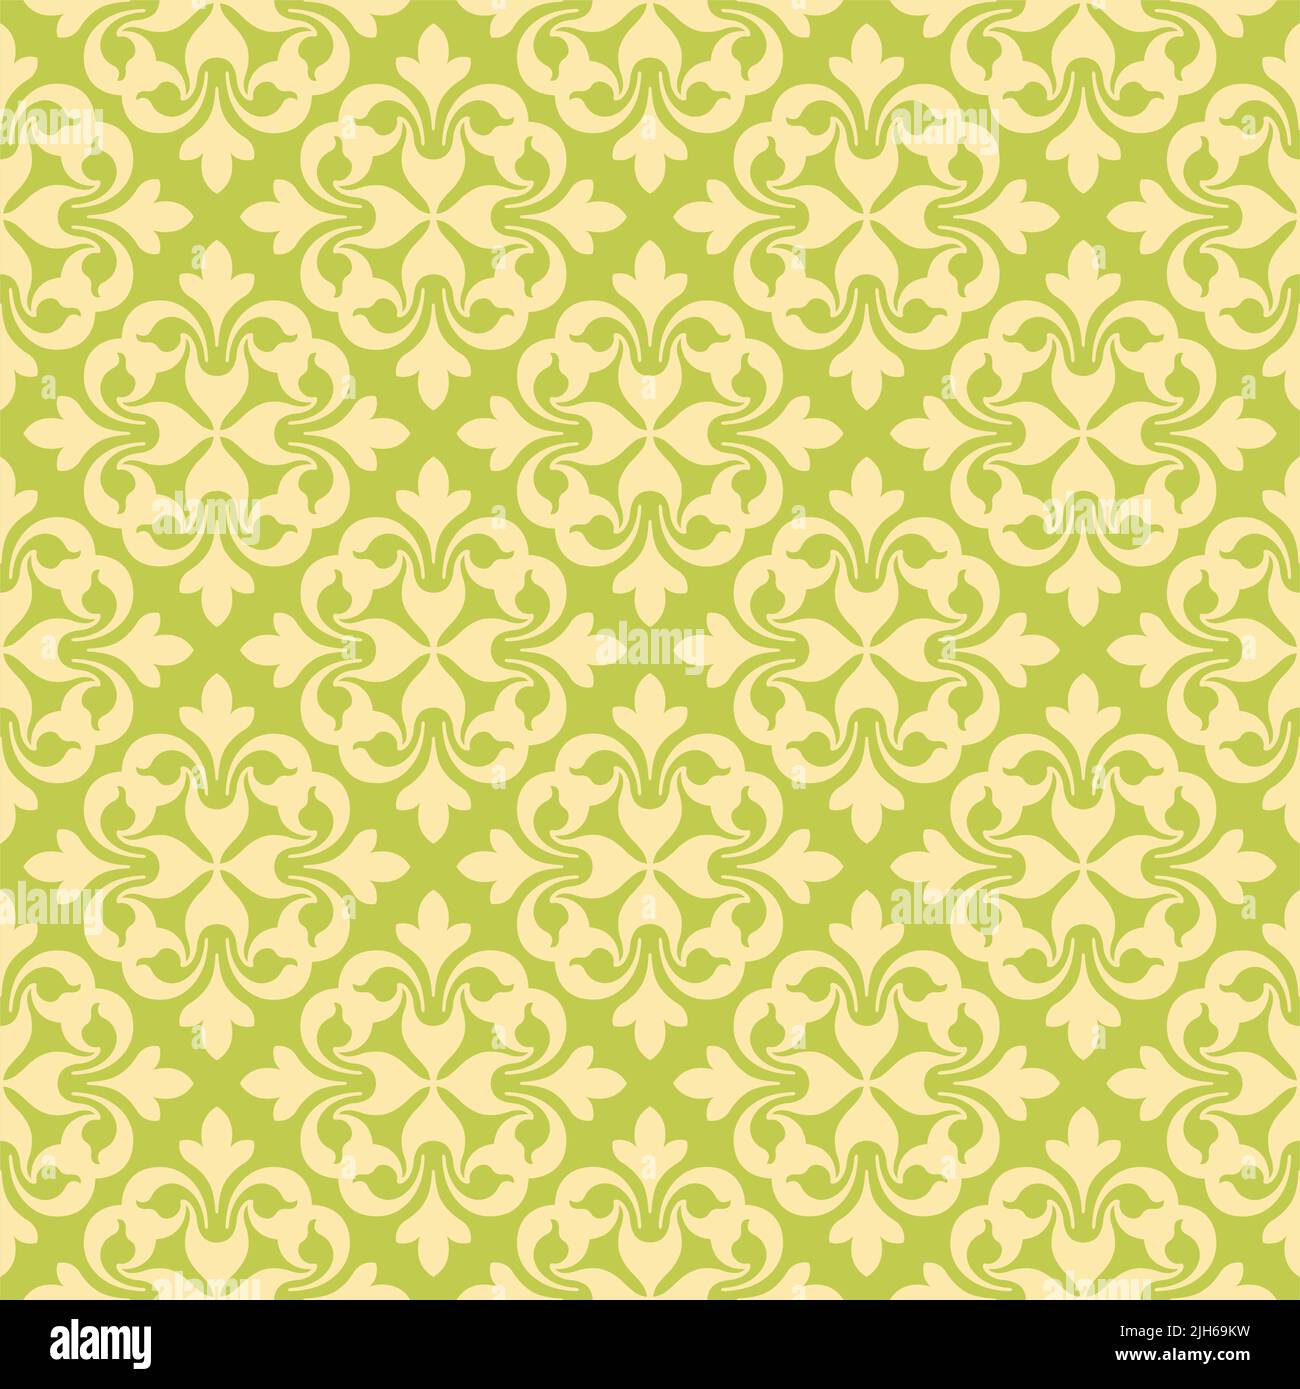 A vintage retro vector repeating pattern made up of clover icons creating a damask pattern. Stock Vector